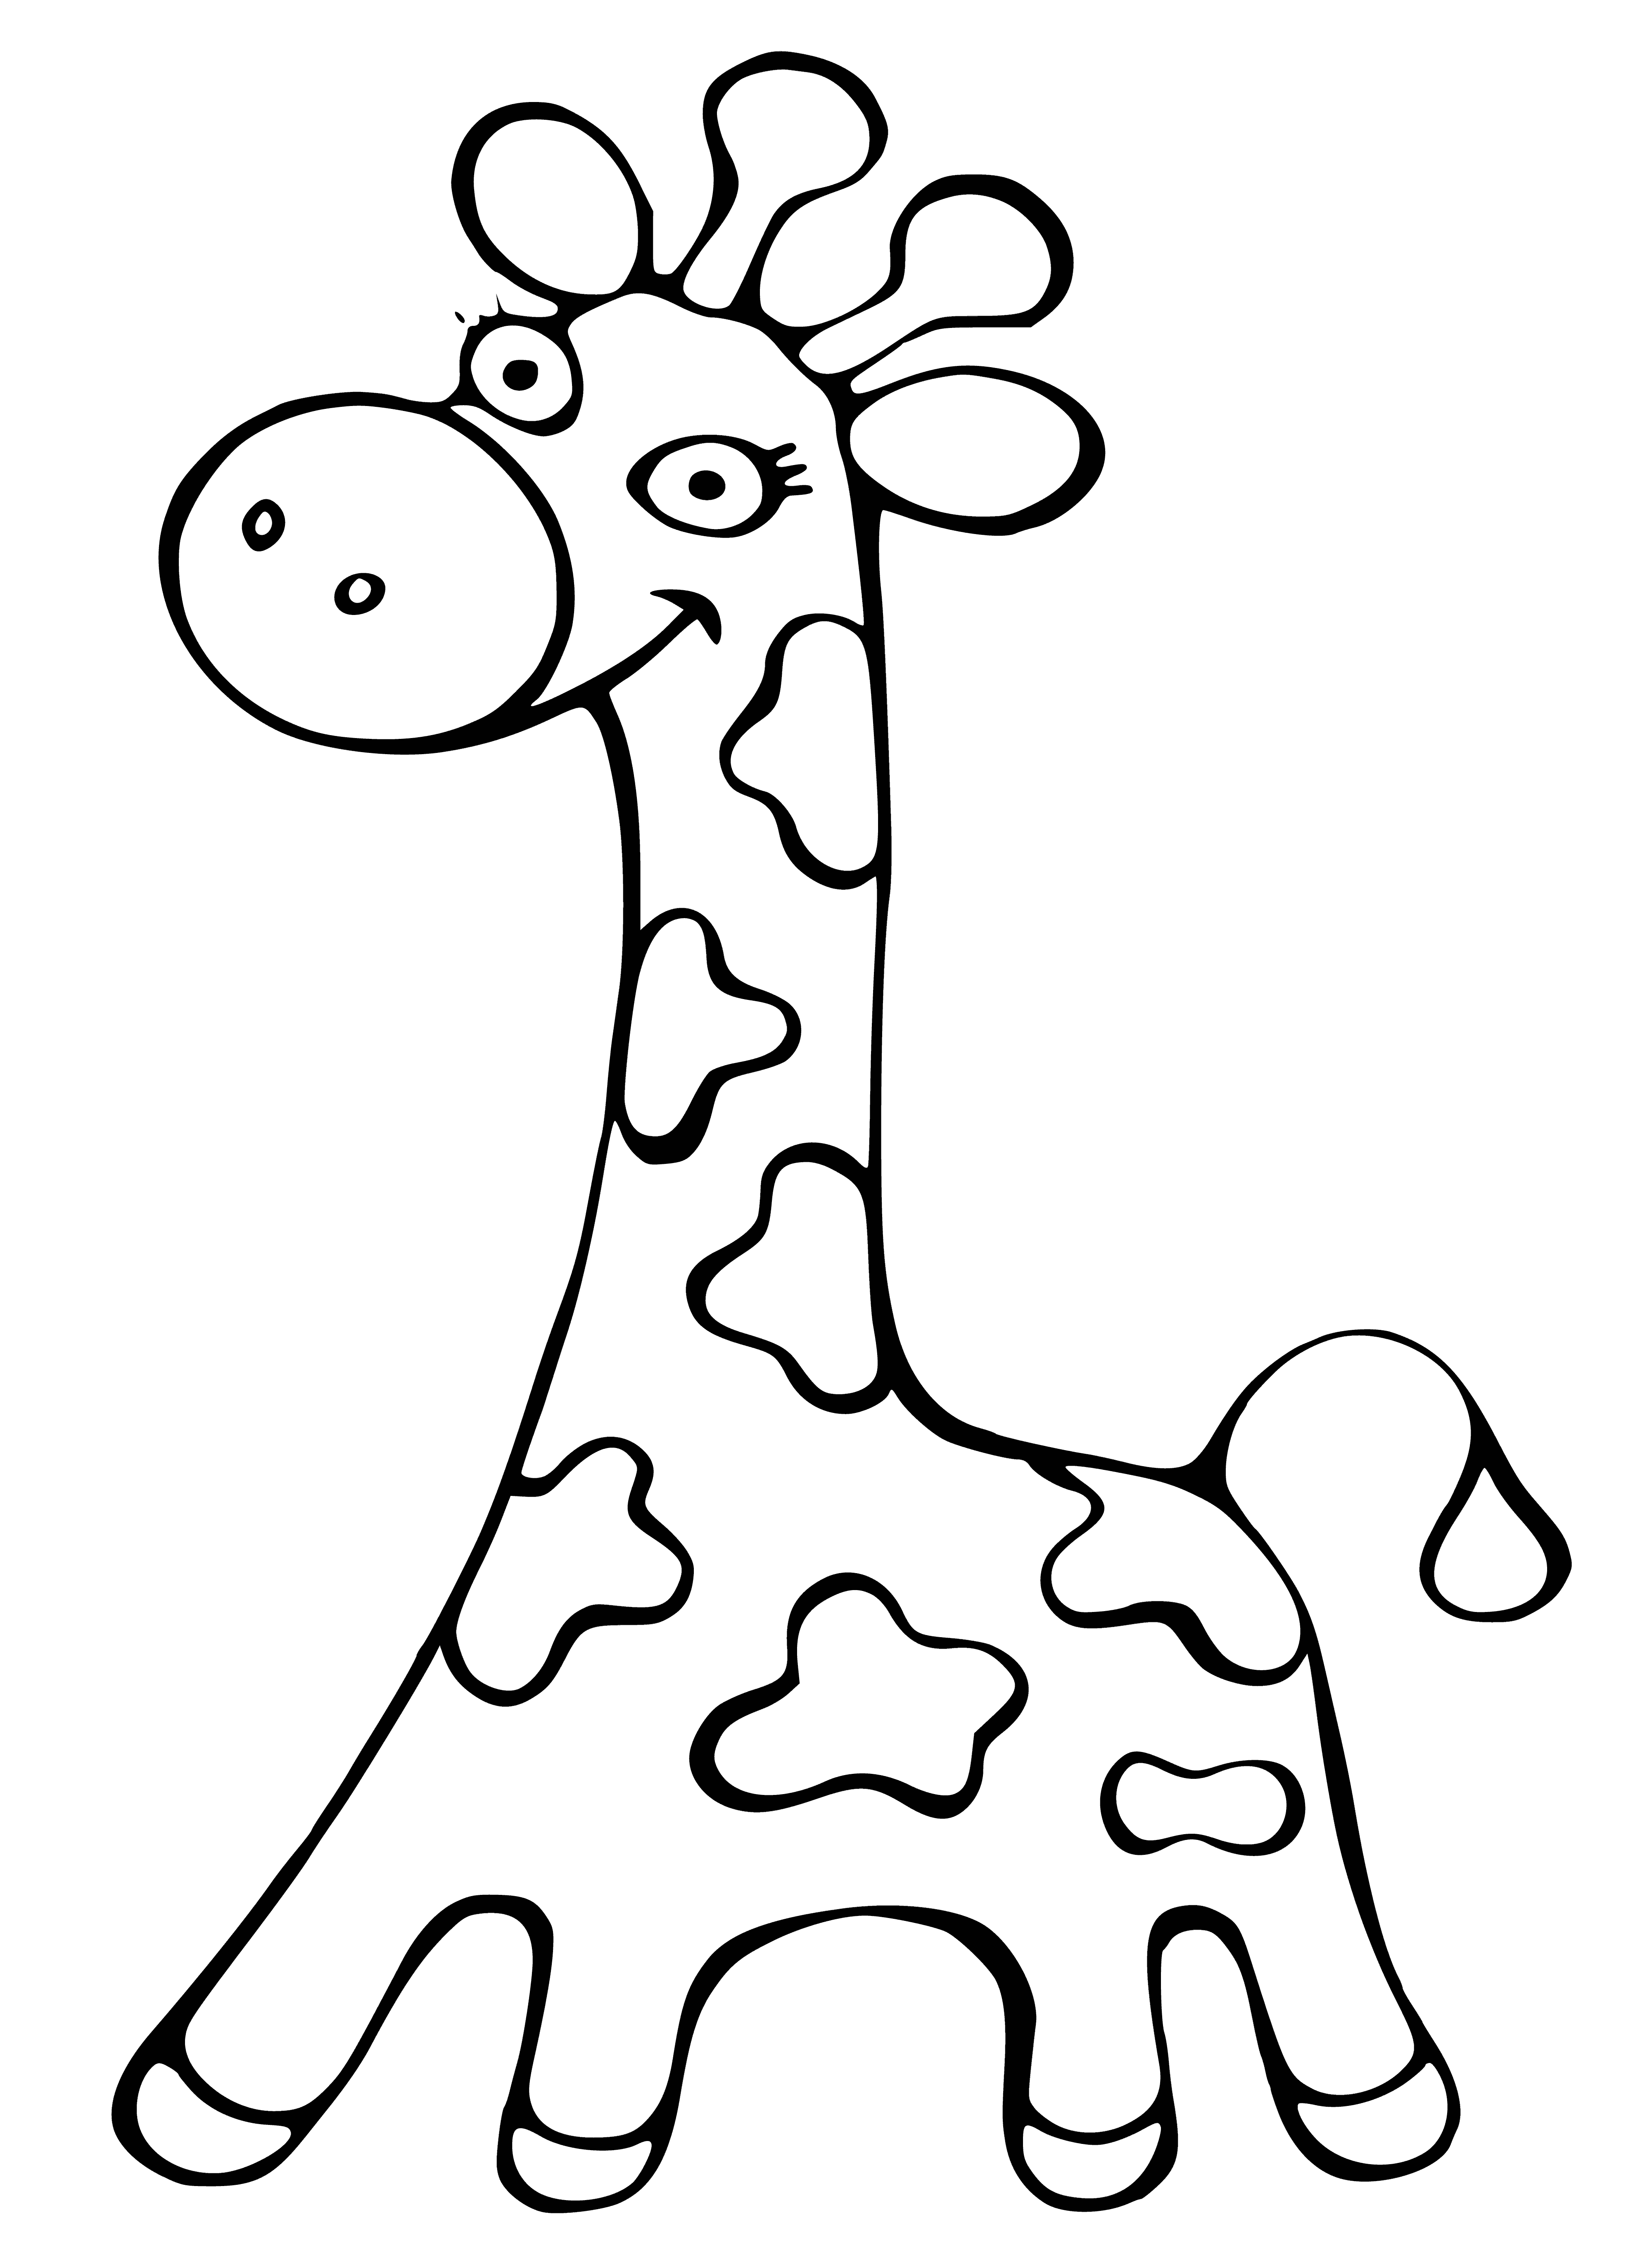 coloring page: Giraffes are long, tall mammals found in Africa; some subspecies are 14.5 to 19 feet high and can weigh up to 1,930 lbs. Its long neck thought to help with high leaves, but also spotting predators, and competing for mates.